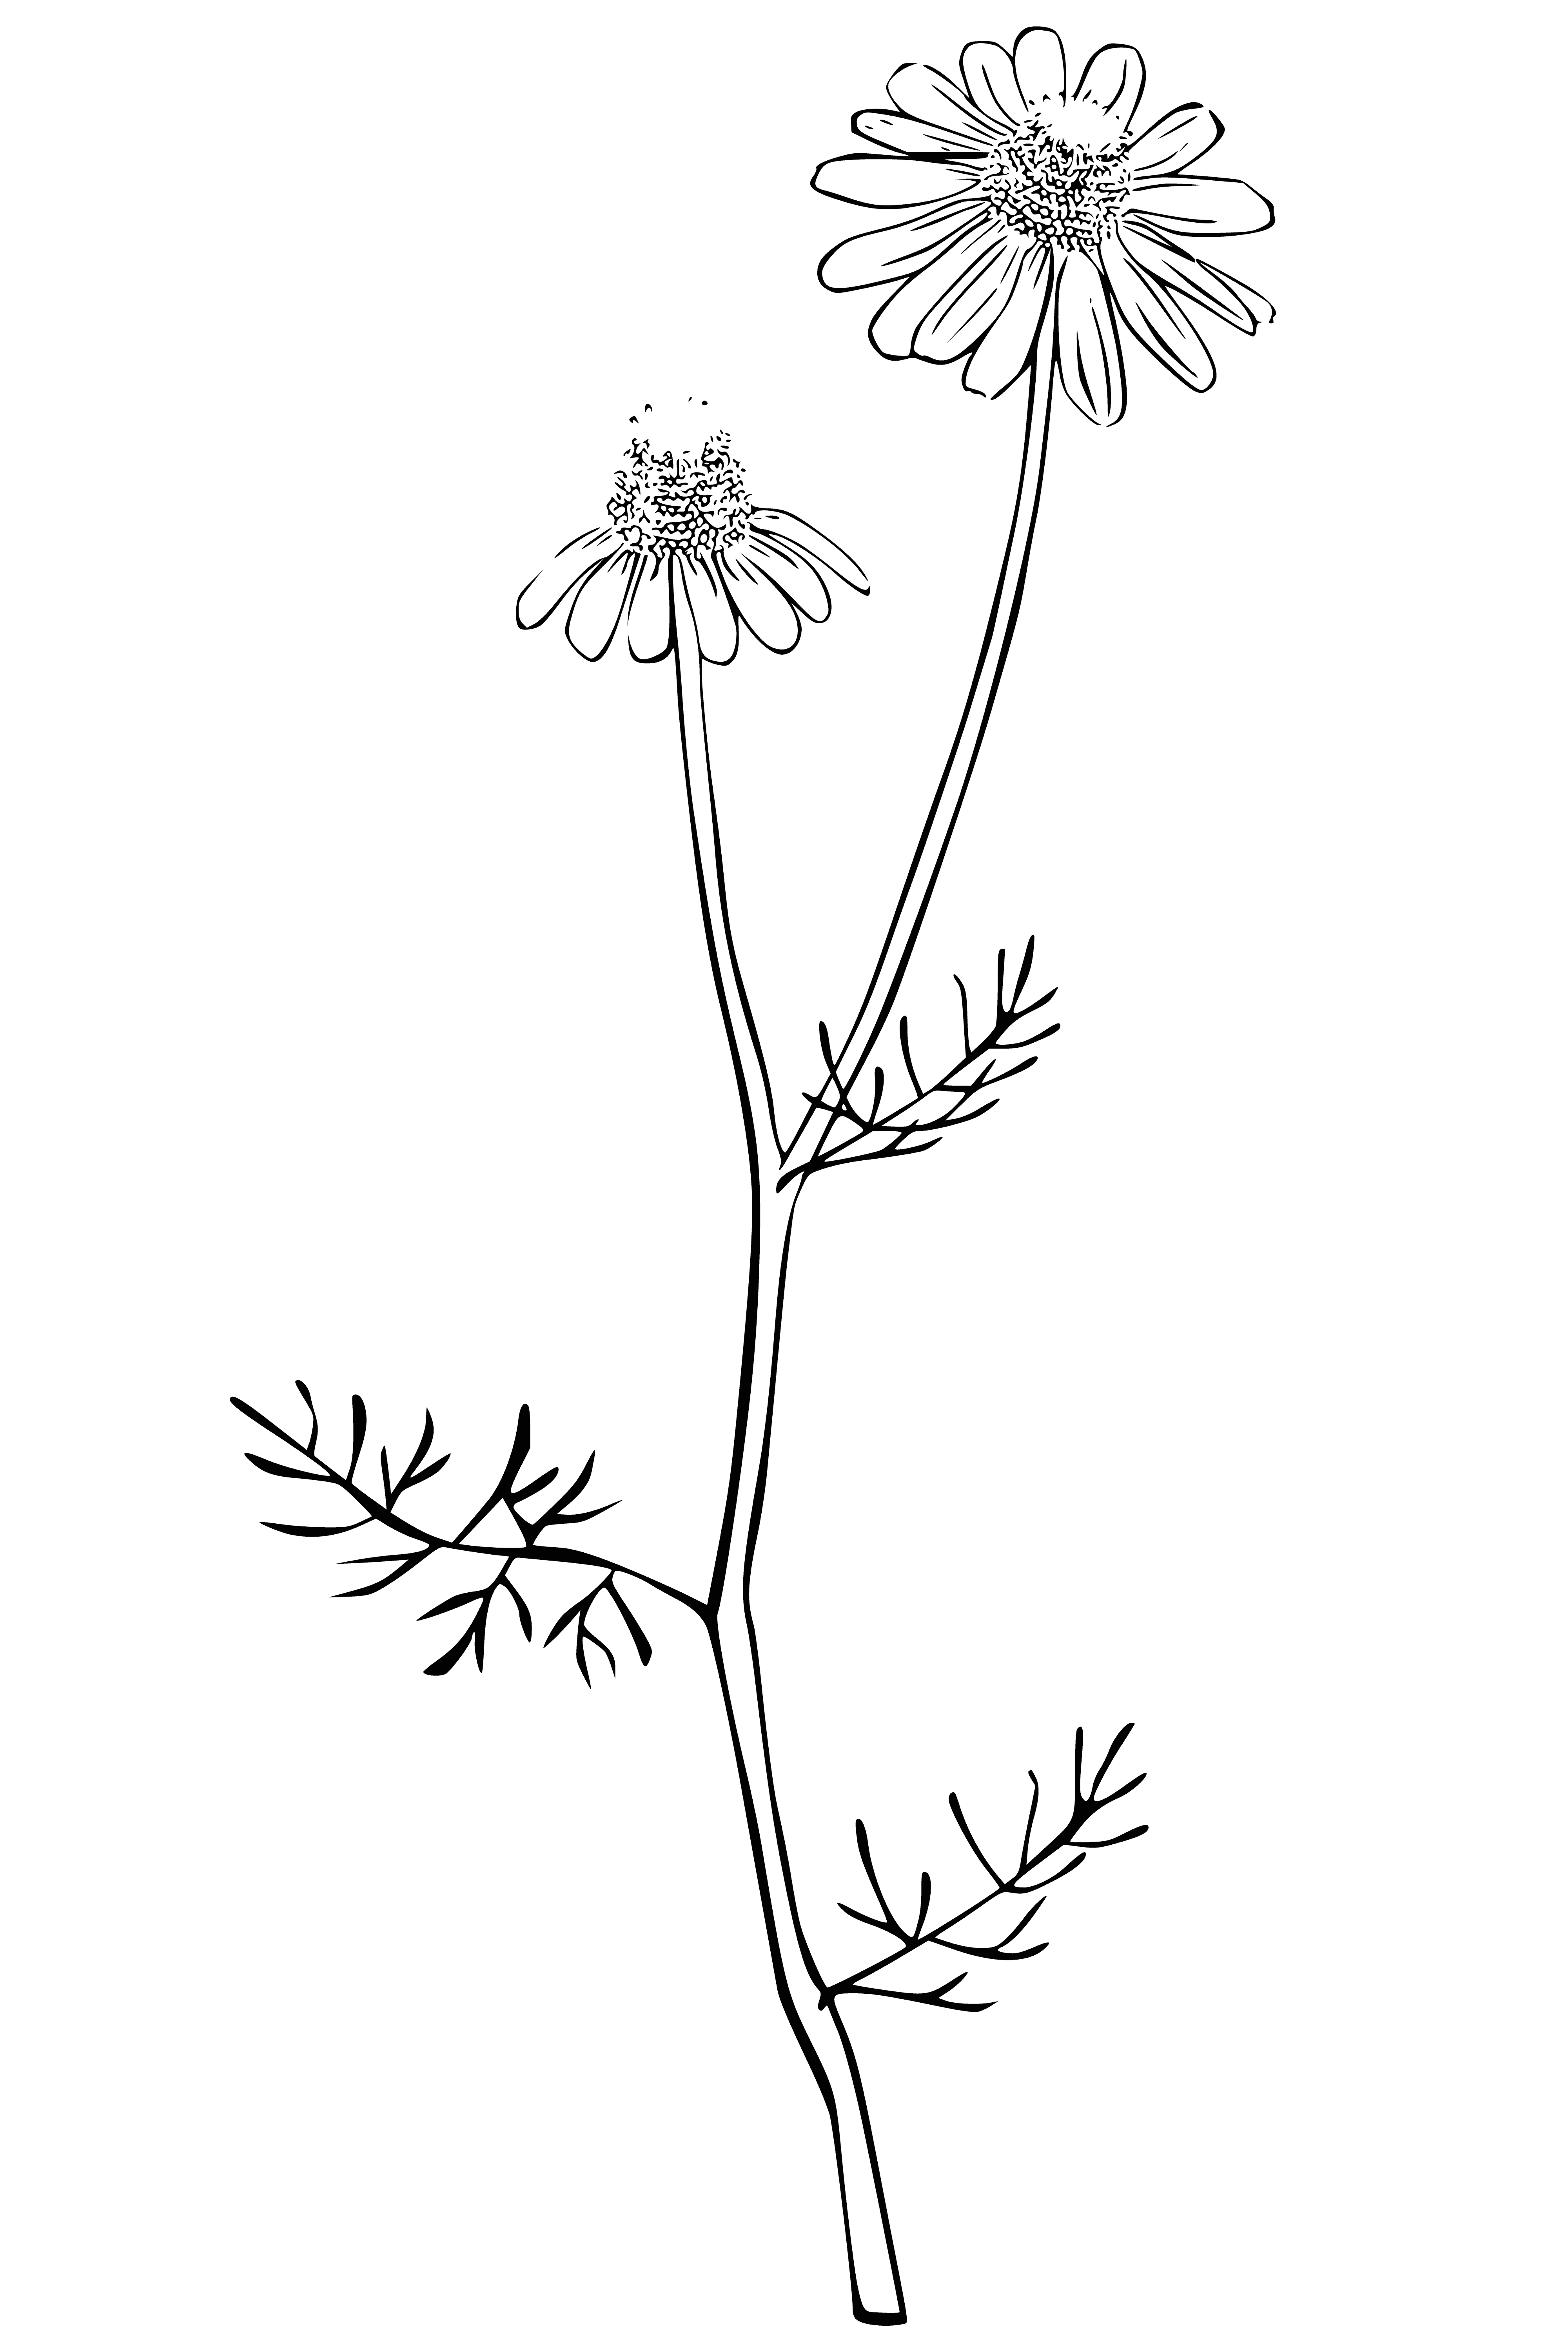 coloring page: Small white daisy flowers with yellow centers; used to make tea and for decoration. #chamomile